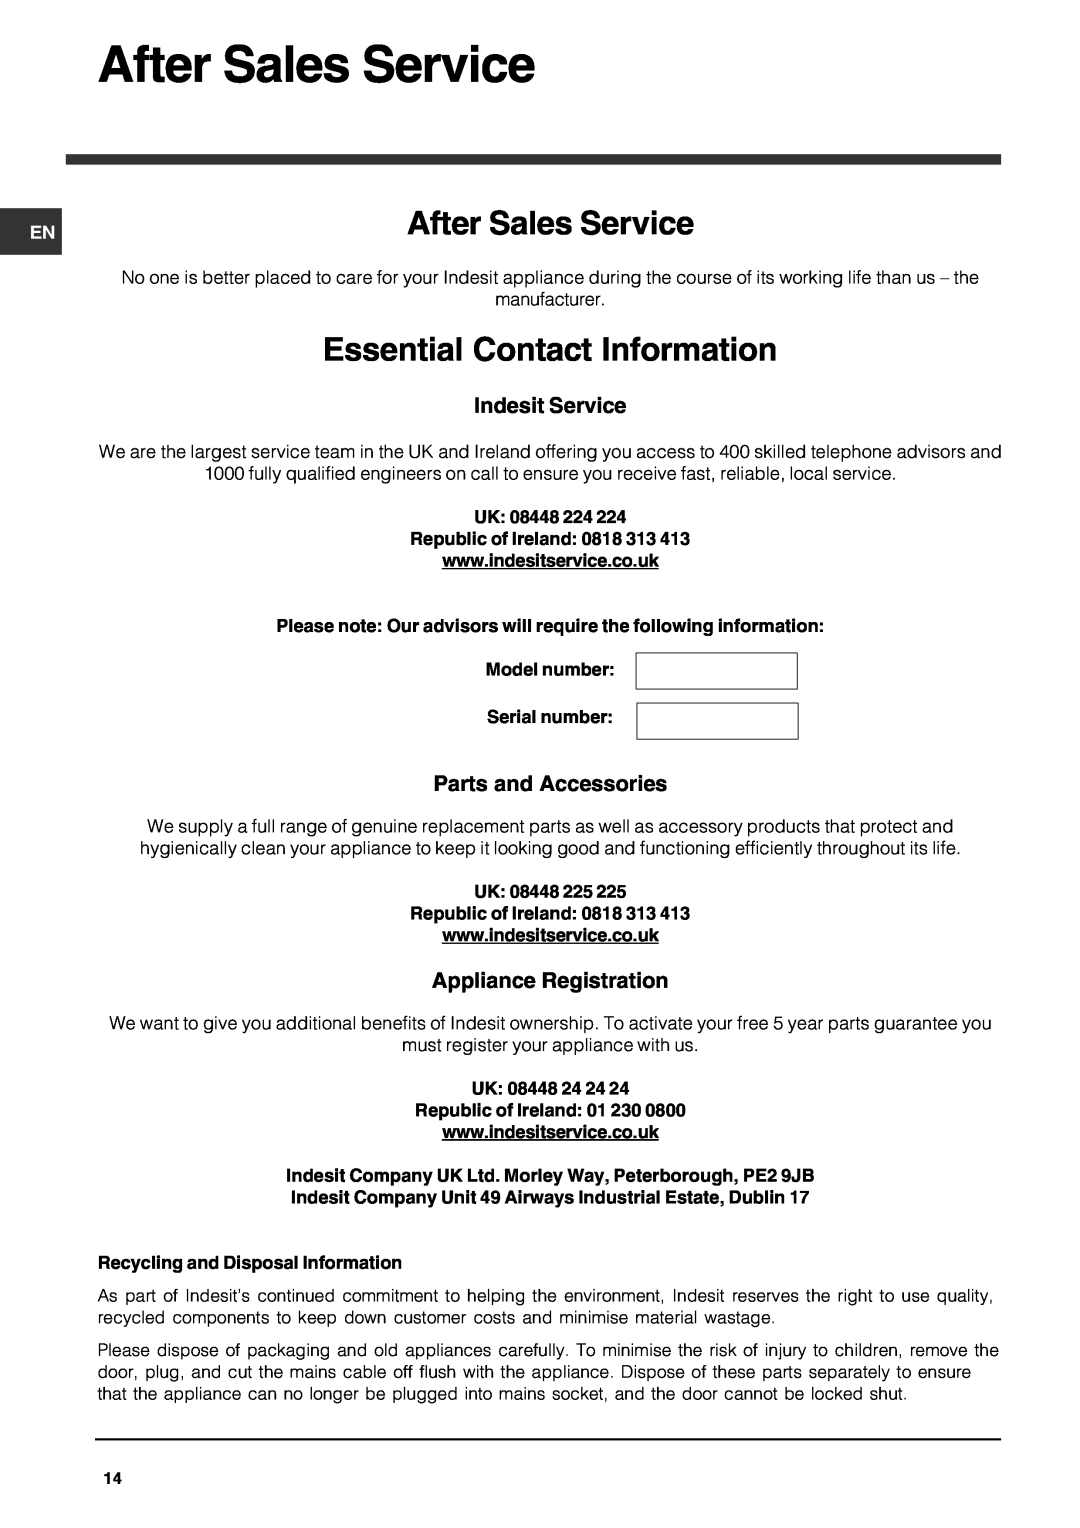 Indesit IDS 105 manual After Sales Service, Essential Contact Information 